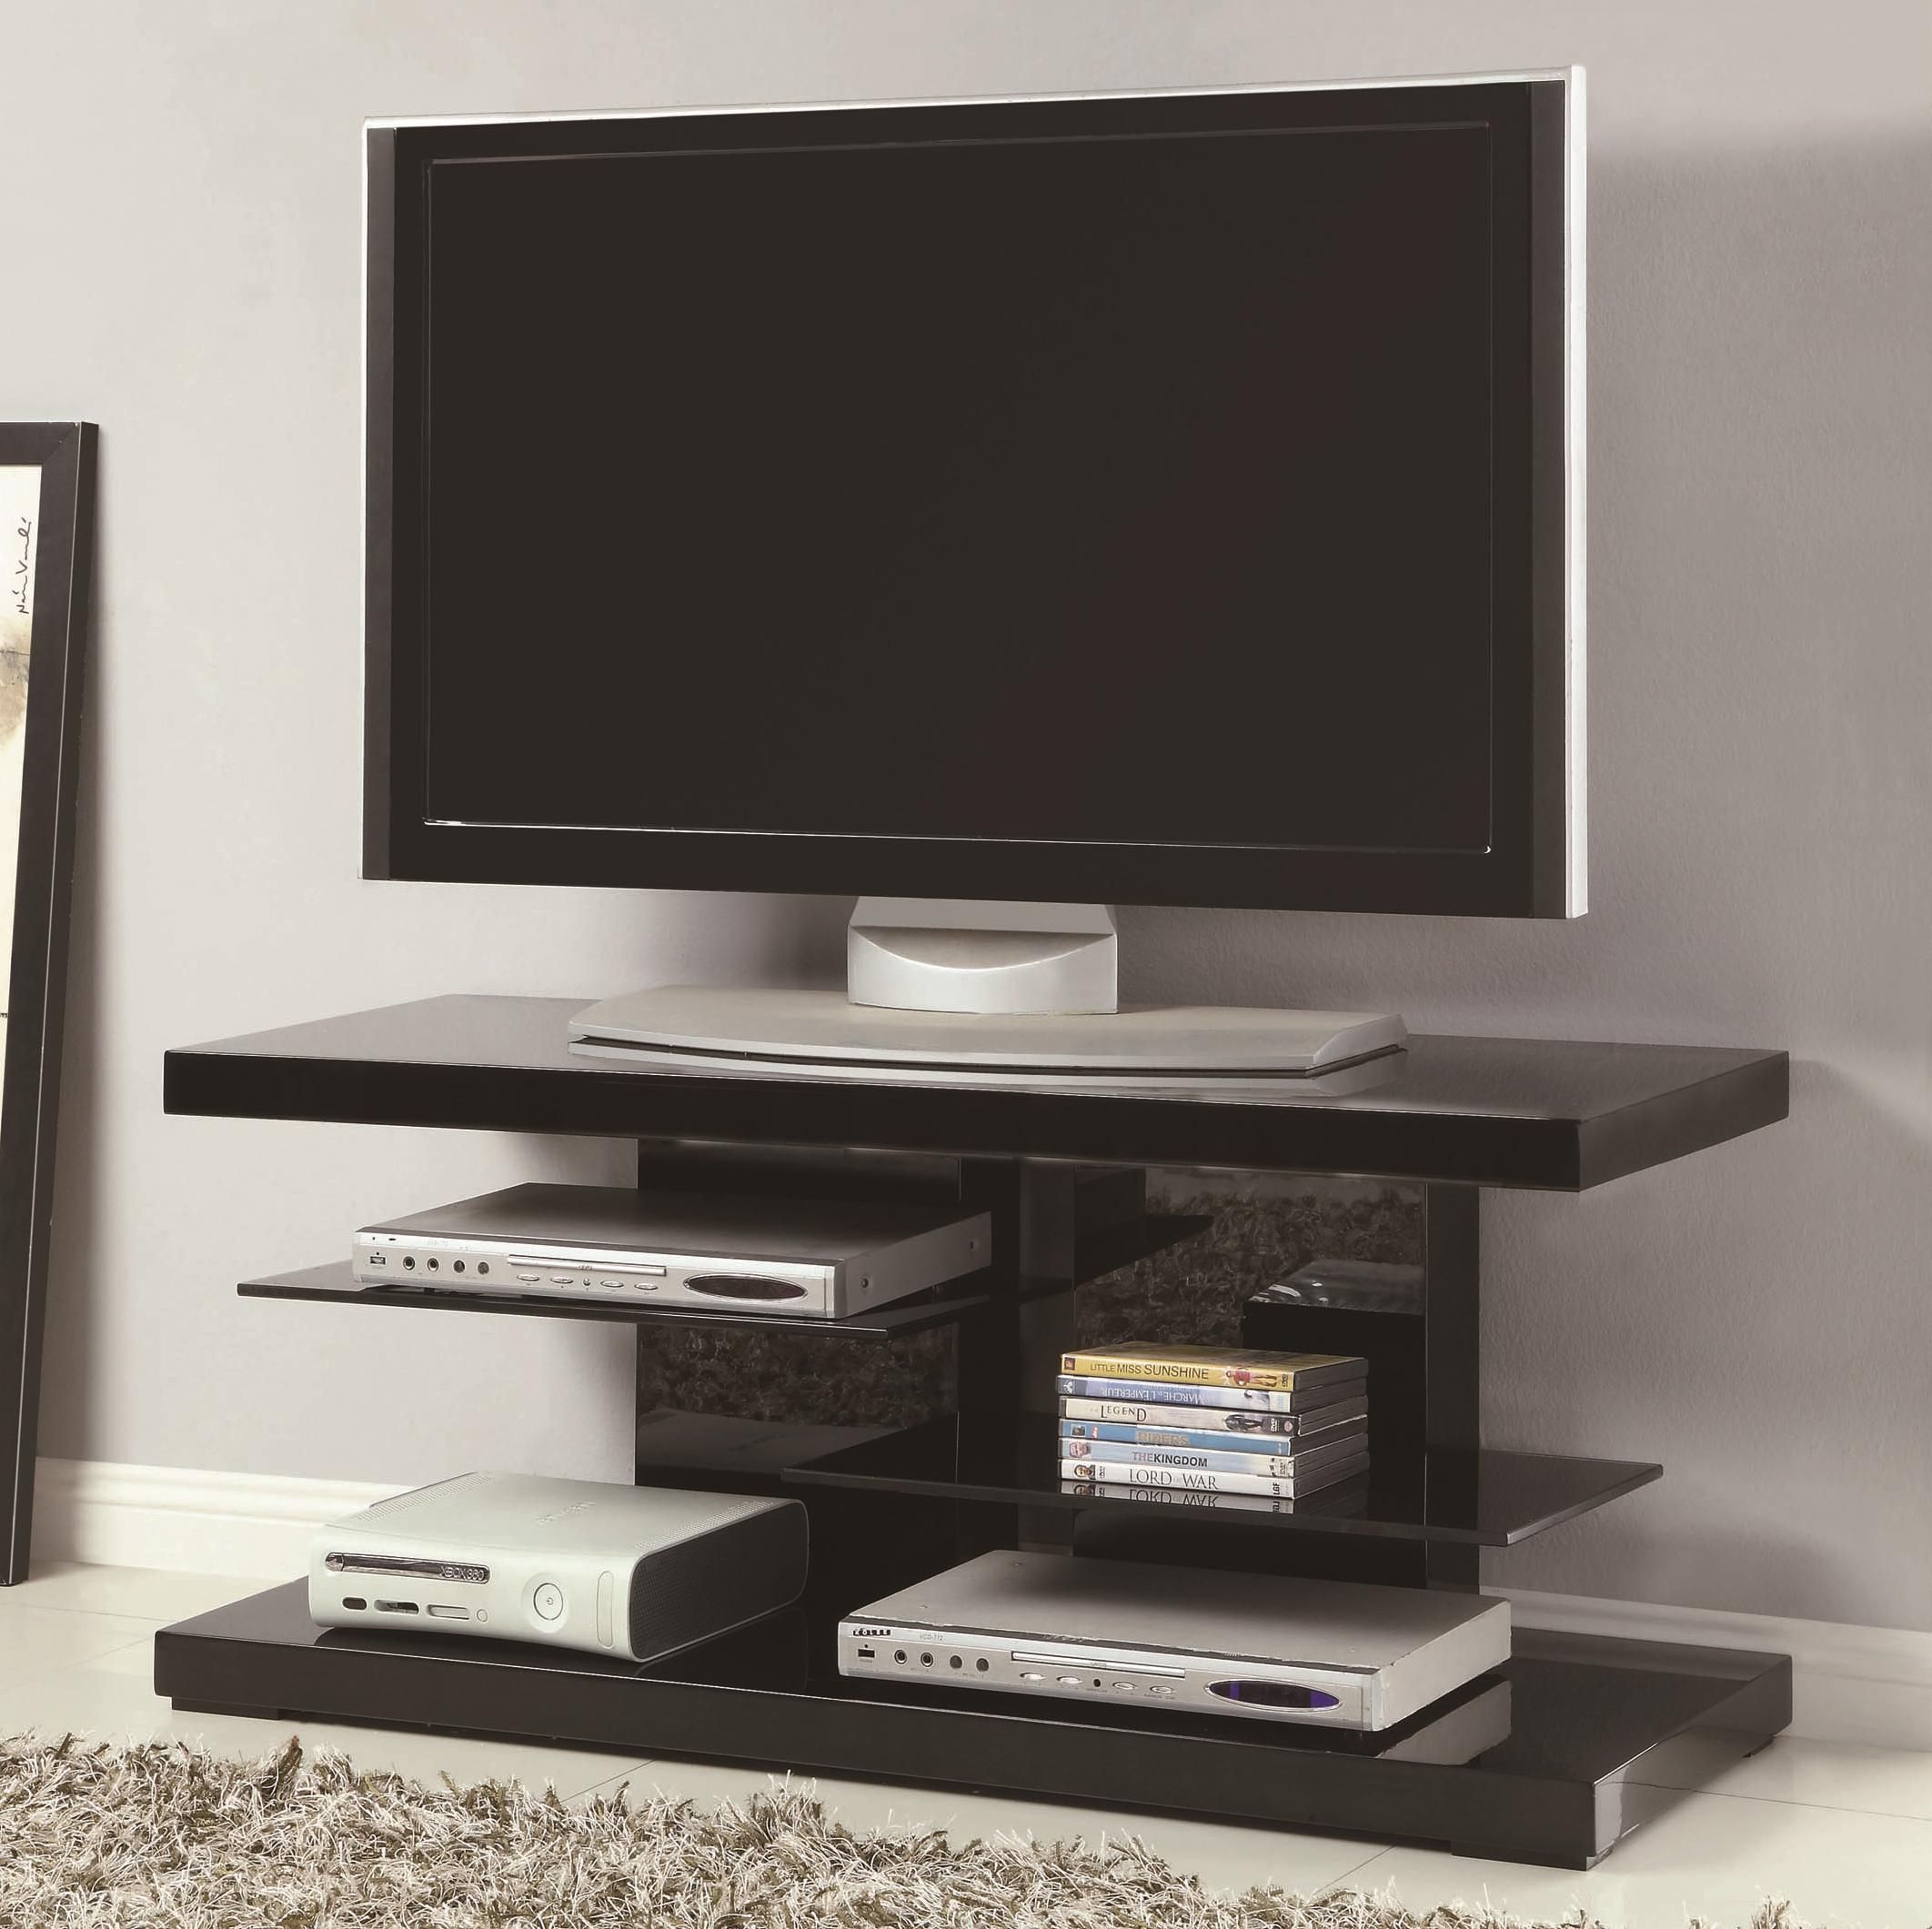 Coaster Tv Stands Modern Tv Stand With Alternating Glass With Regard To Contemporary Black Tv Stands Corner Glass Shelf (View 6 of 15)